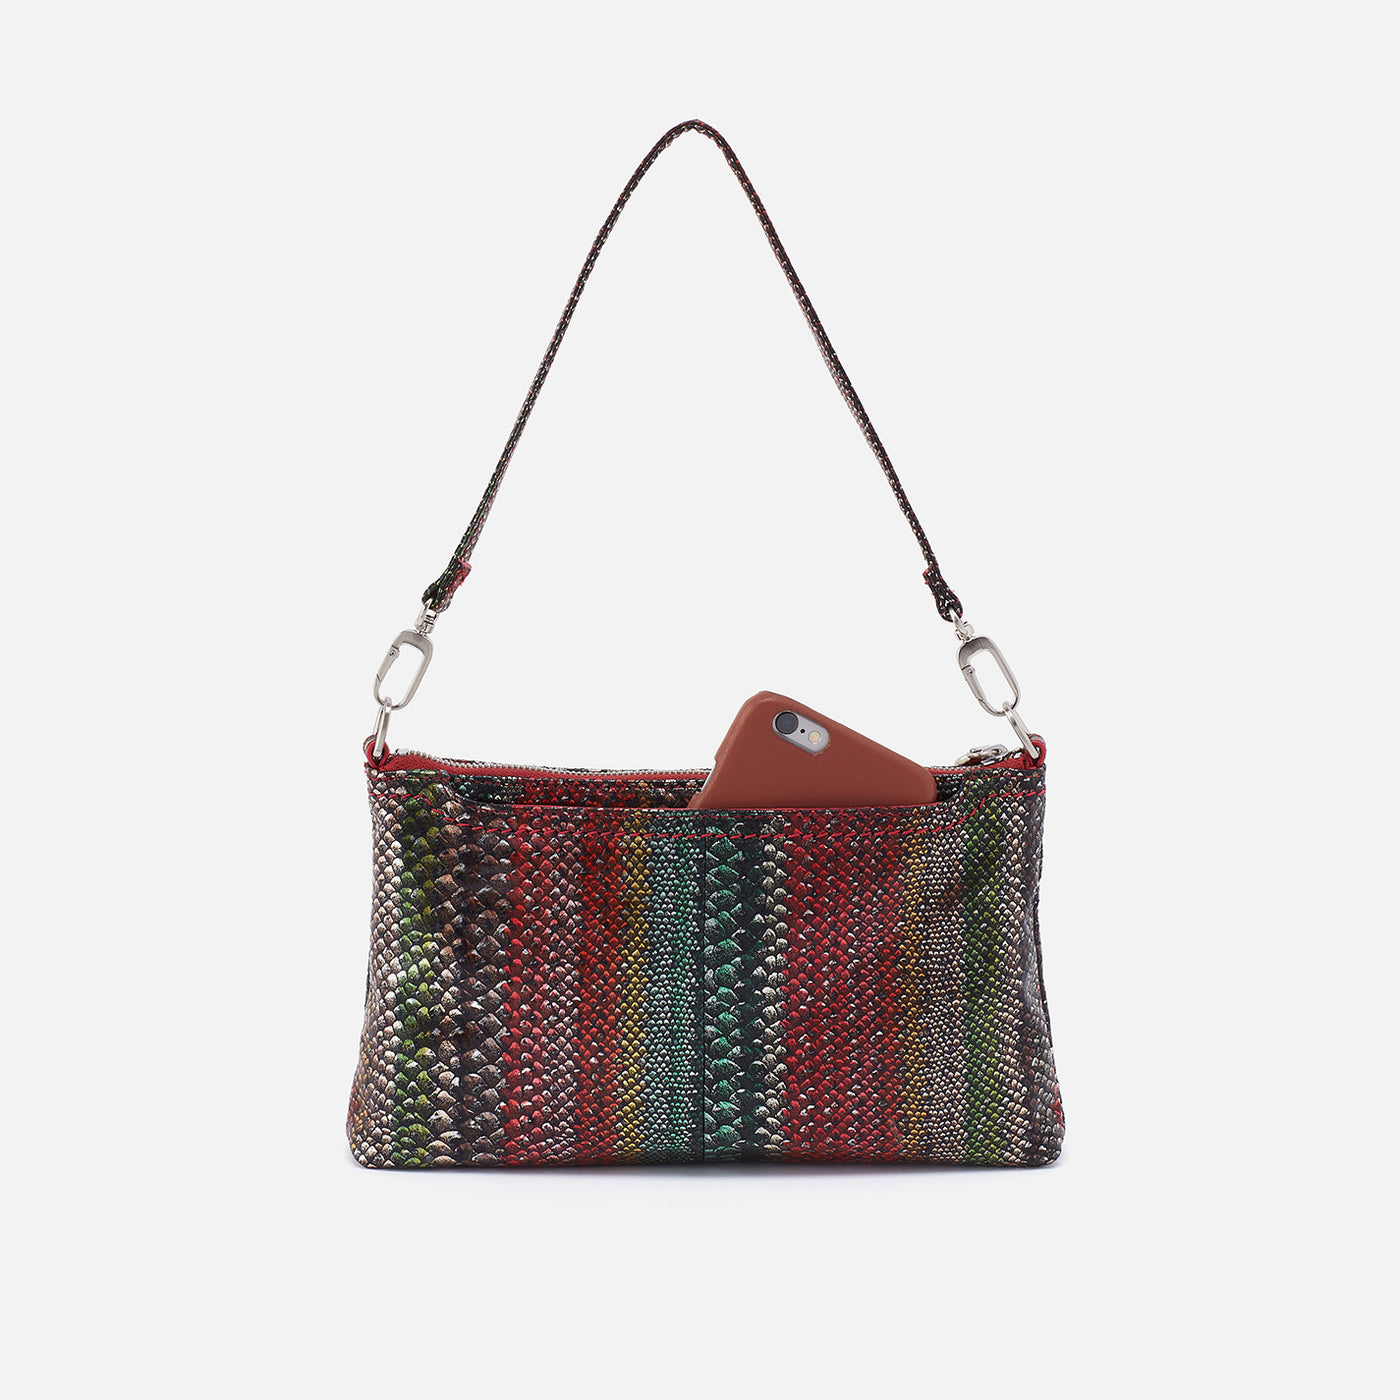 Darcy Crossbody in Printed Leather - Holiday Stripe